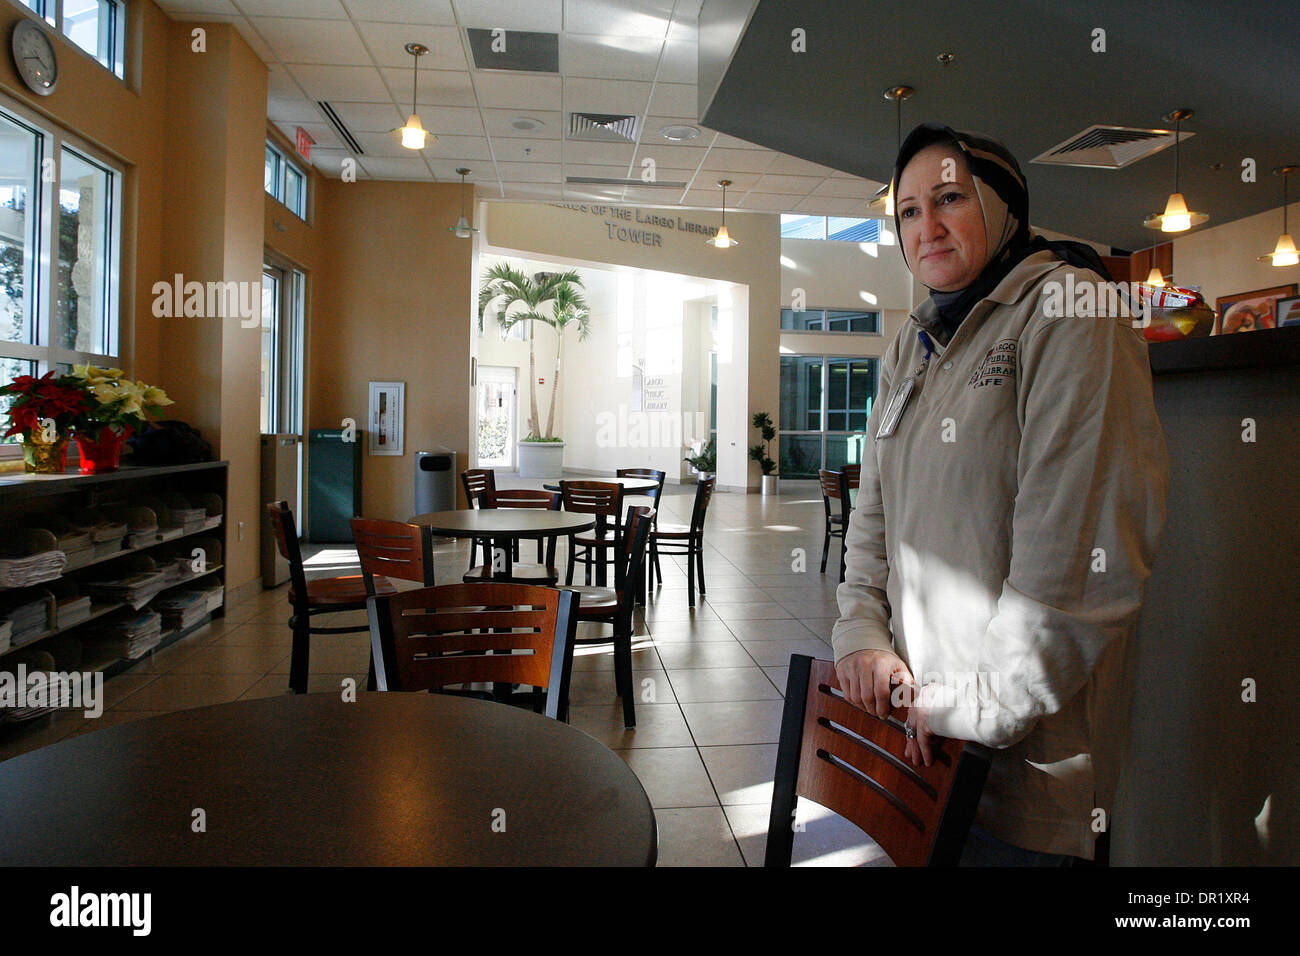 NP 299867 KEEL LARCAFE 1 SCOTT KEELER   |   Times 1. Dalal Mansour, owner of the Bookmark Cafe business in the Largo Public Library, says she can not afford the 752.00 a month rent the city charges her. She says she may have to quit the business. ''Im loosing 000.00 a month here, it's just not worth it,'' said Mansour. (Credit Image: © St. Petersburg Times/ZUMA Press) Stock Photo